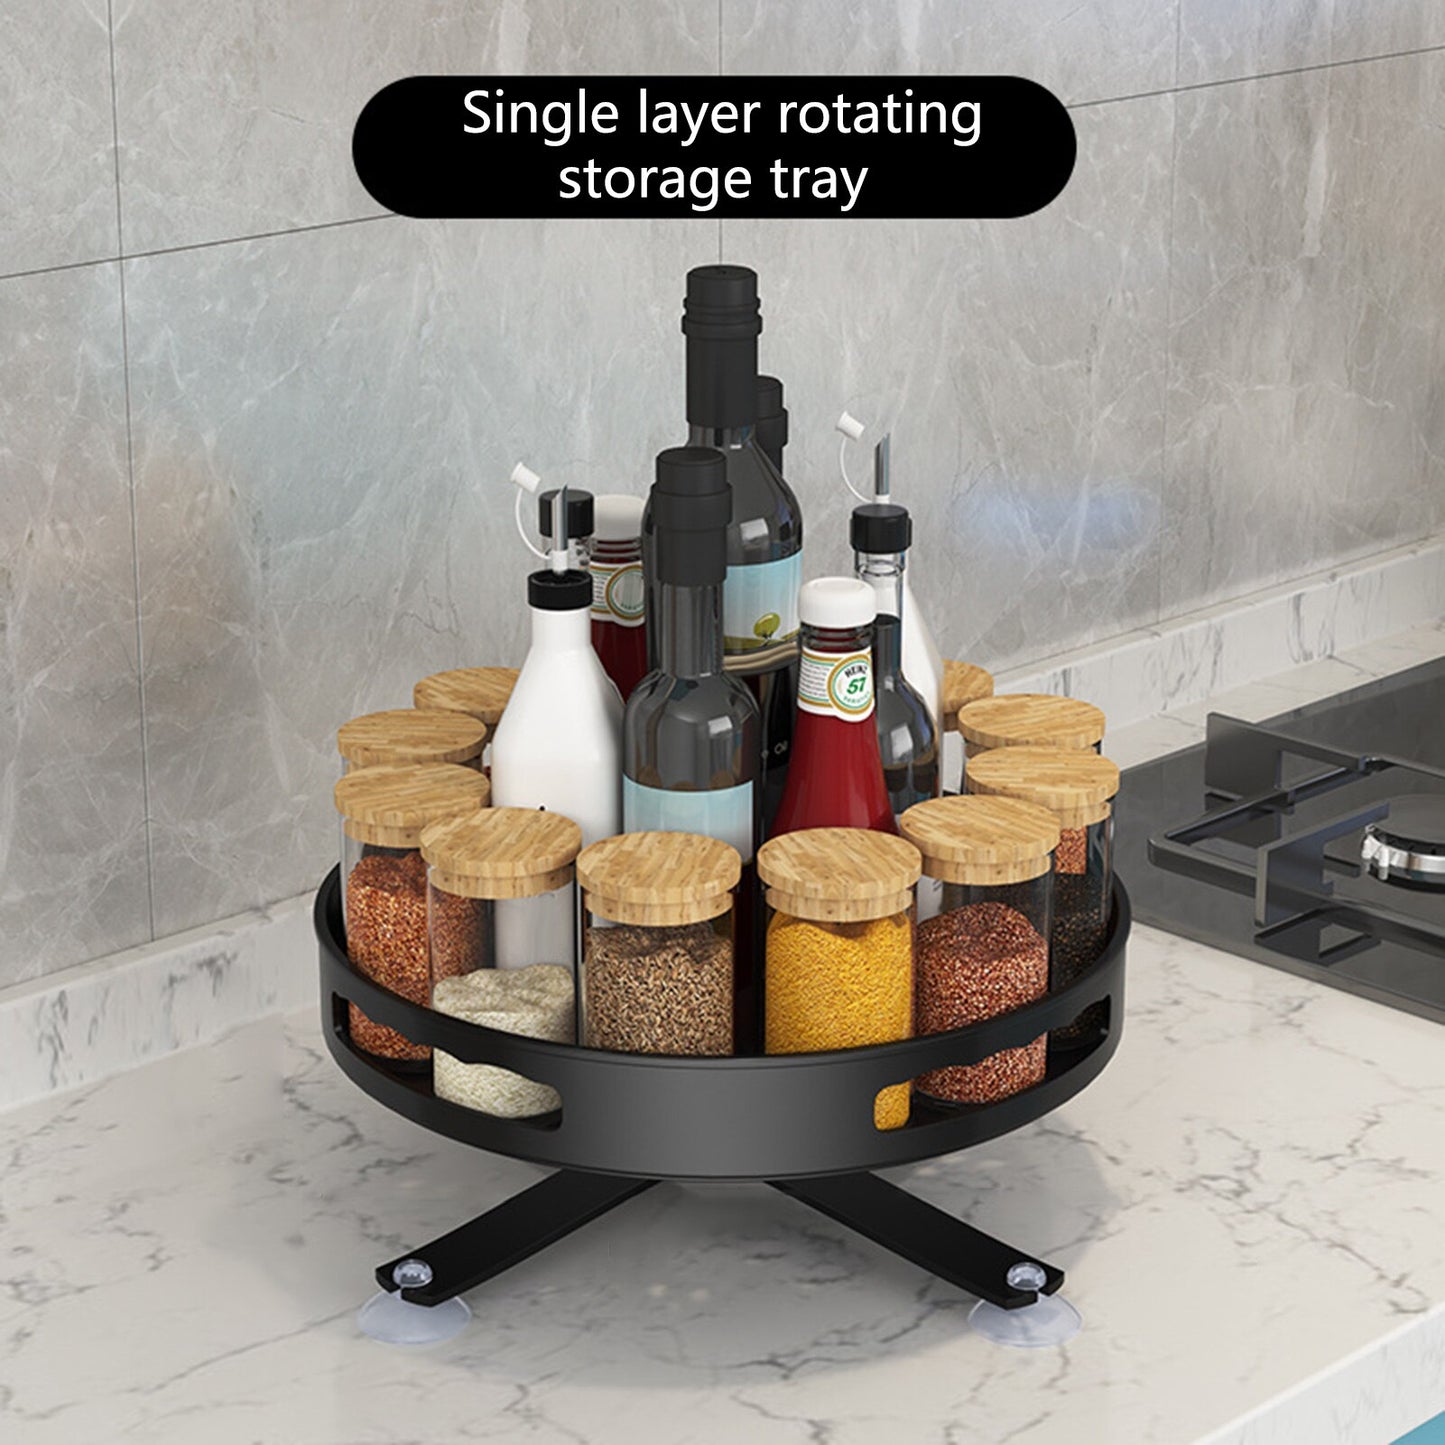 Round Wide 360 Degree Rotating Spice Rack